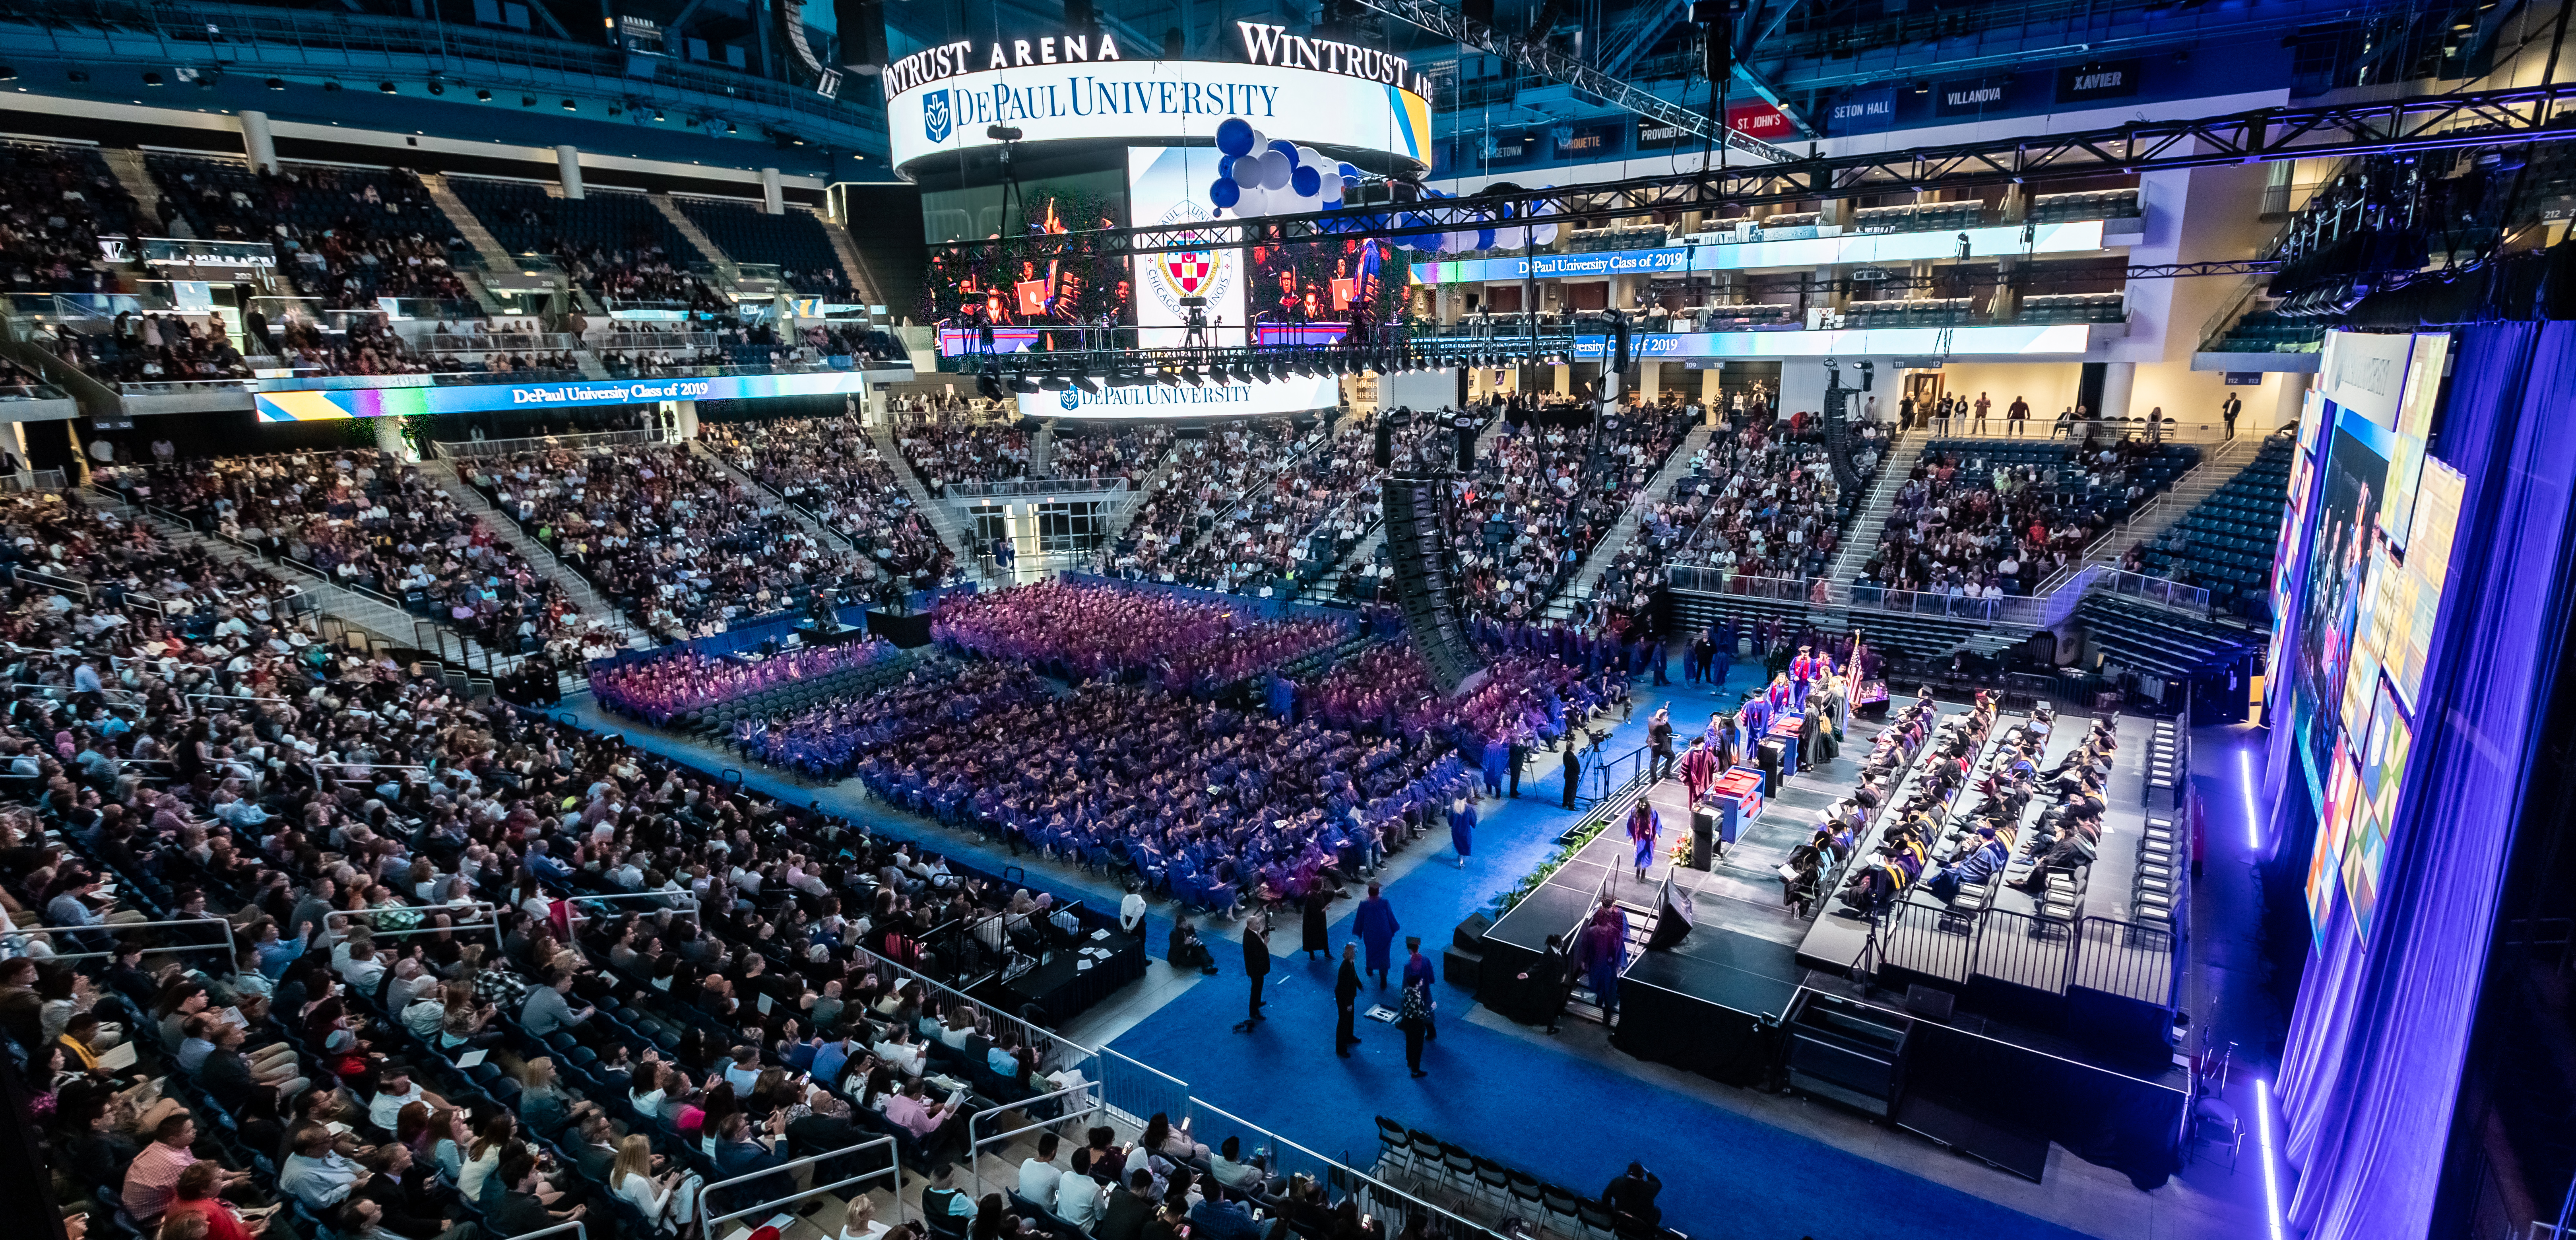 Depaul Academic Calendar 2022 Depaul Announces In-Person Commencement Schedule For Class Of 2022 | Campus  And Community | Sections | Depaul University Newsline | Depaul University,  Chicago